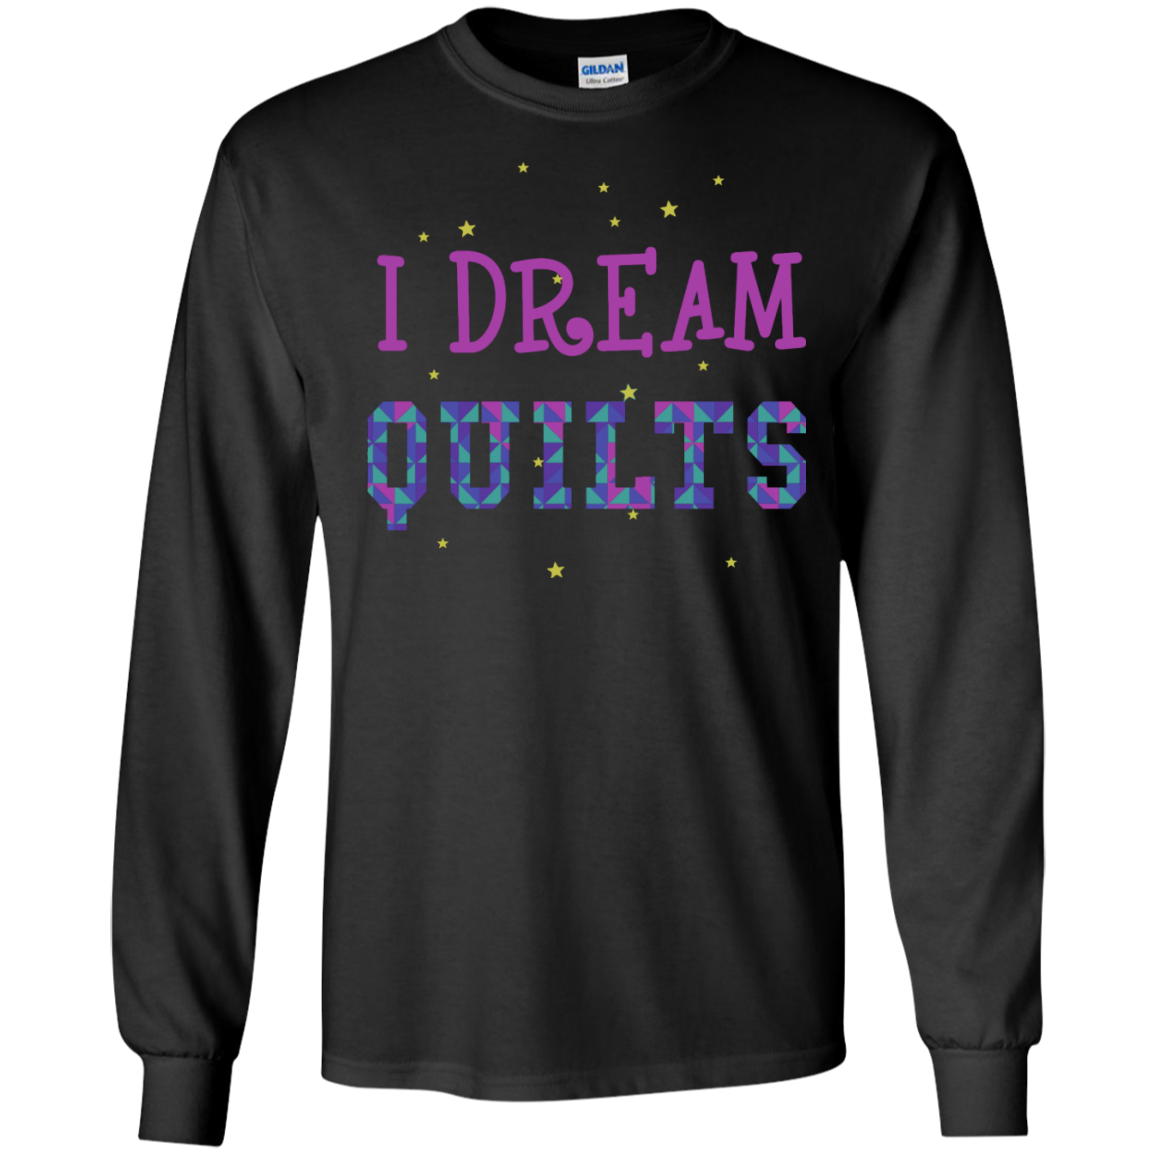 I Dream Quilts Long Sleeve Ultra Cotton T-Shirt - Crafter4Life - 4